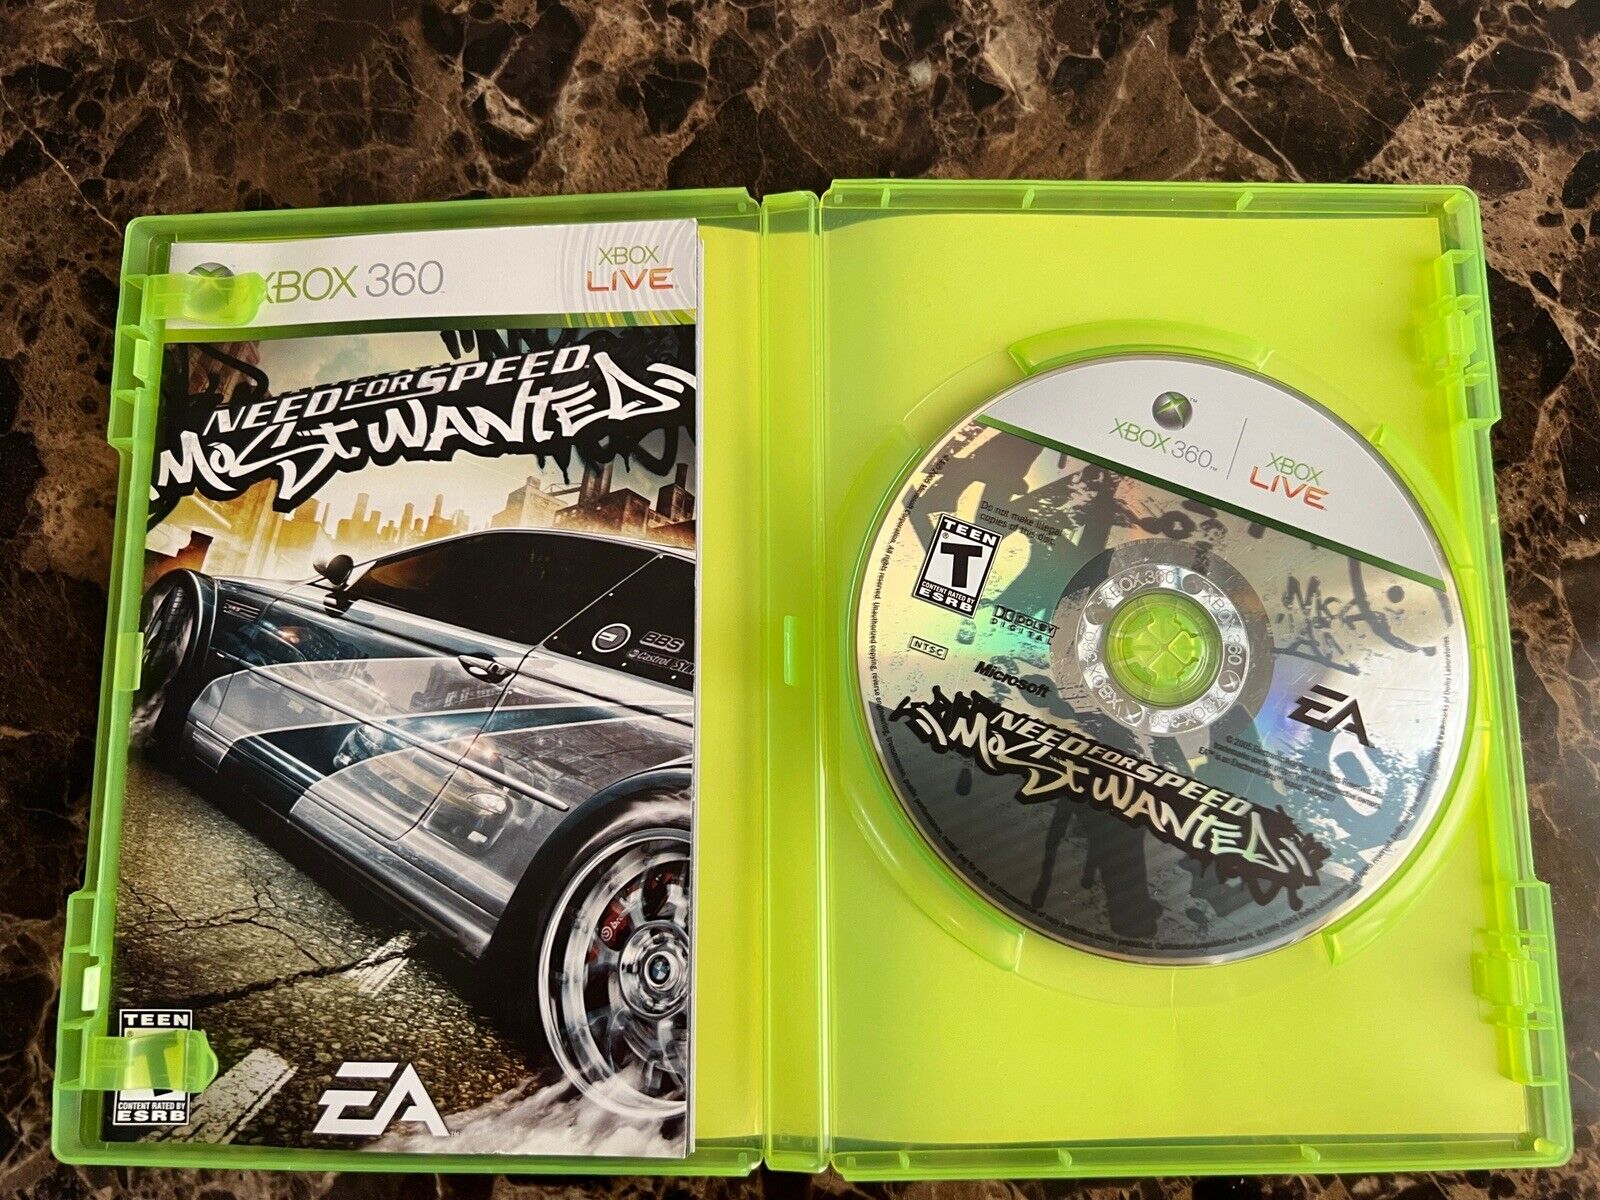 Need for Speed Most Wanted (Microsoft Xbox 360, 2005) Complete CIB